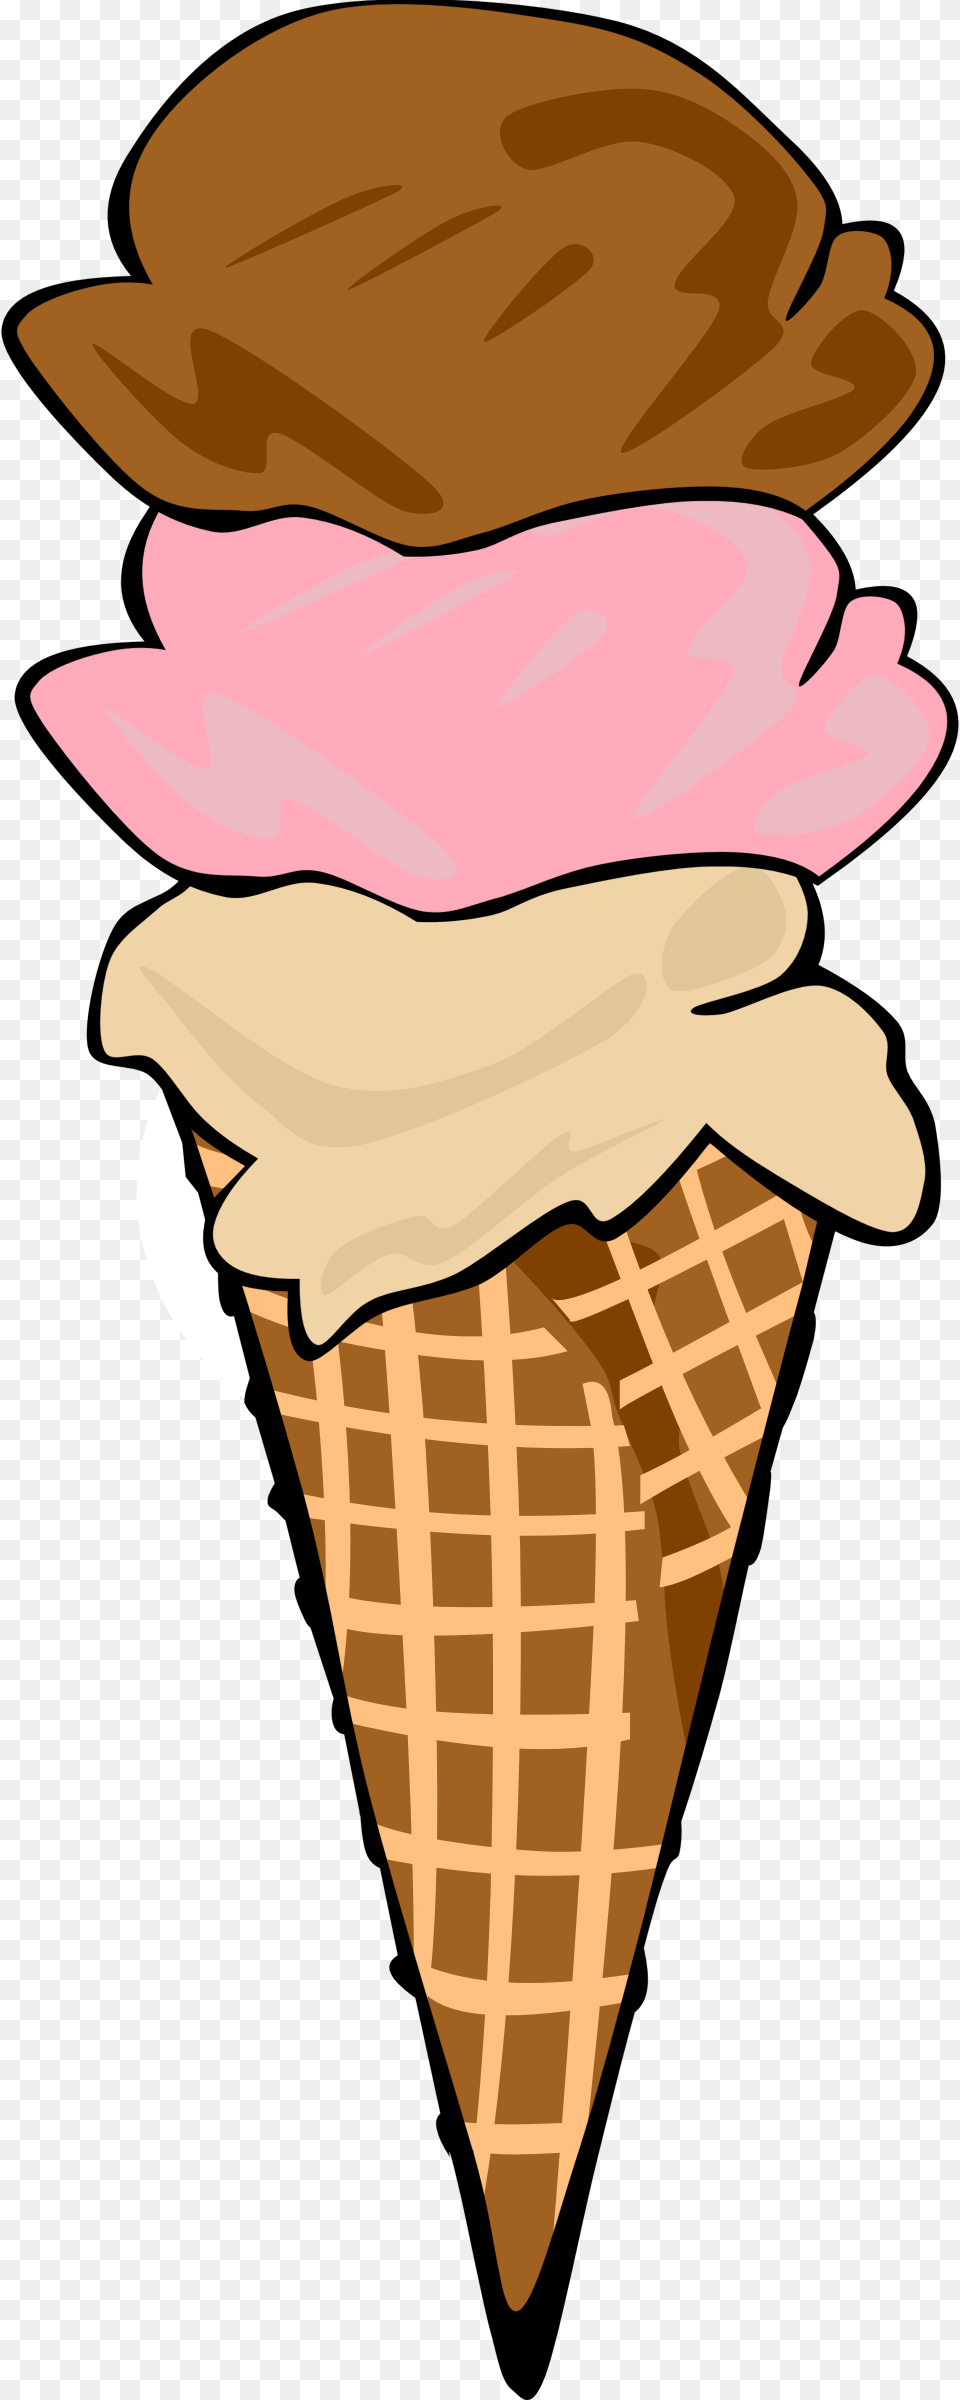 Ice Cream Cone With Sprinkles Clipart Ice Cream Cone Clip Art, Dessert, Food, Ice Cream, Baby Free Png Download